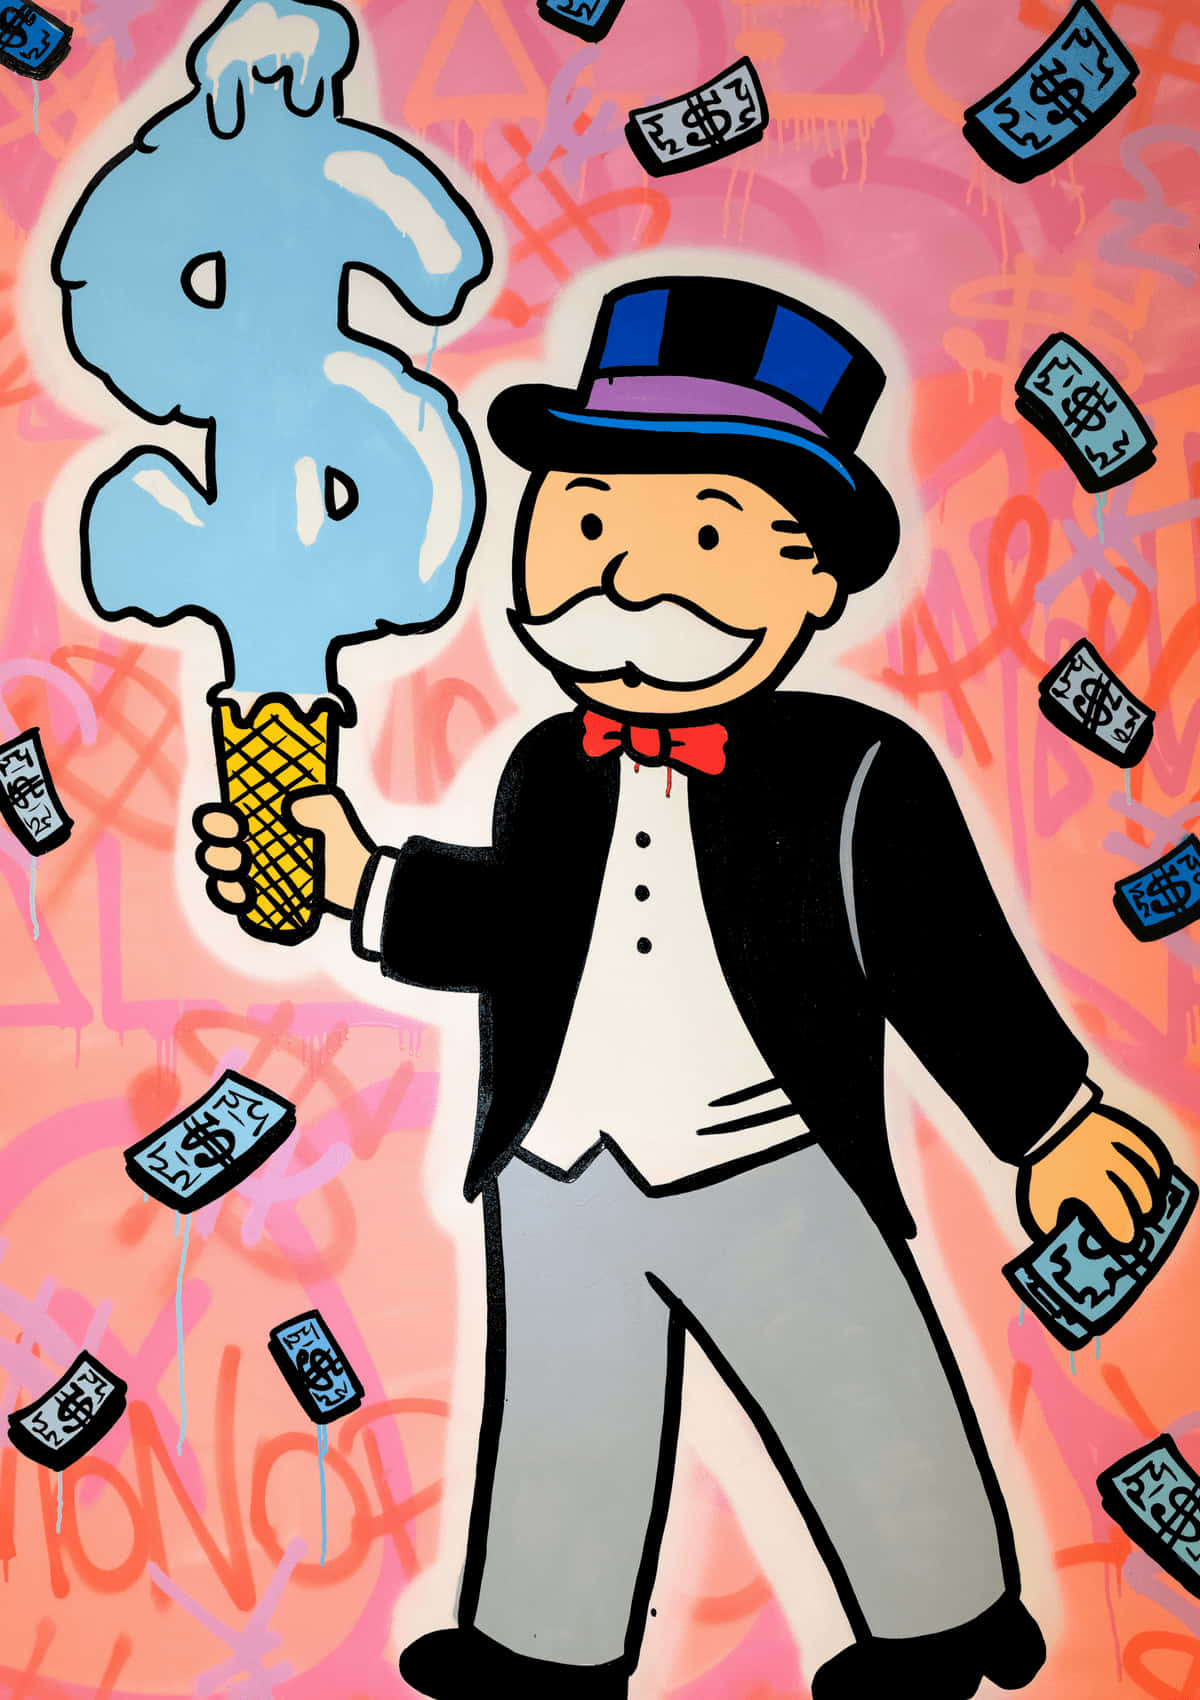 Roll the dice and get rich like Monopoly Man